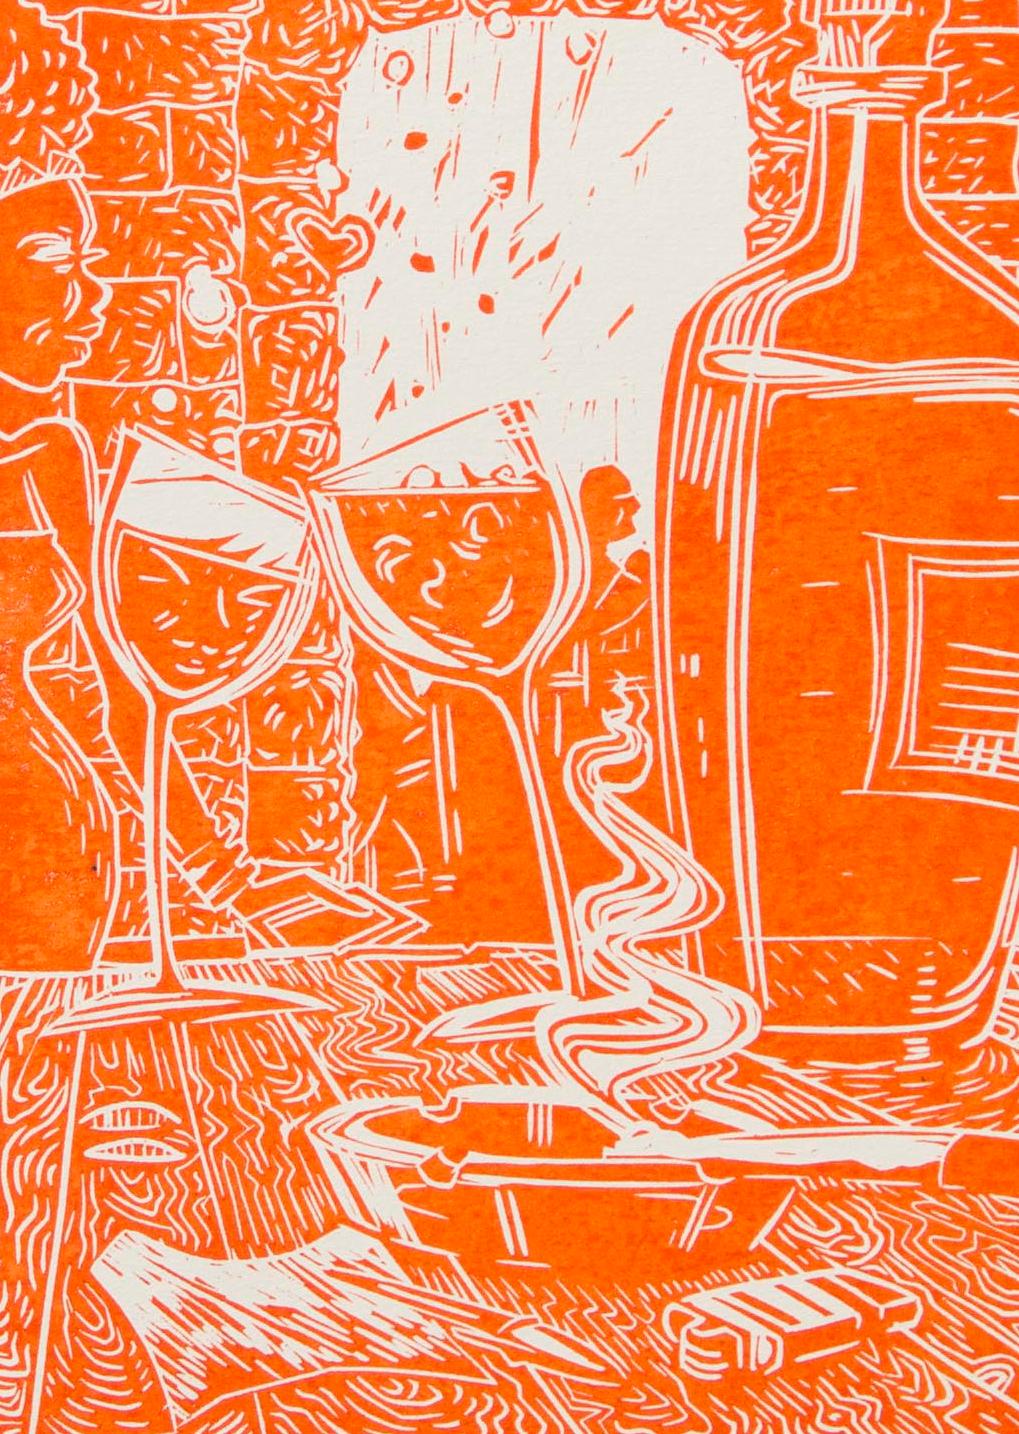 18:30 Wine Time, 2018. Linoleum Block Print on Paper, 1/3

Petrus Amuthenu was born in Swakopmund and grew up in northern Namibia in Uukwaludhi. In 2002 a chance encounter with the late artist Samuel Mbingilo at the Katutura Community Art Centre